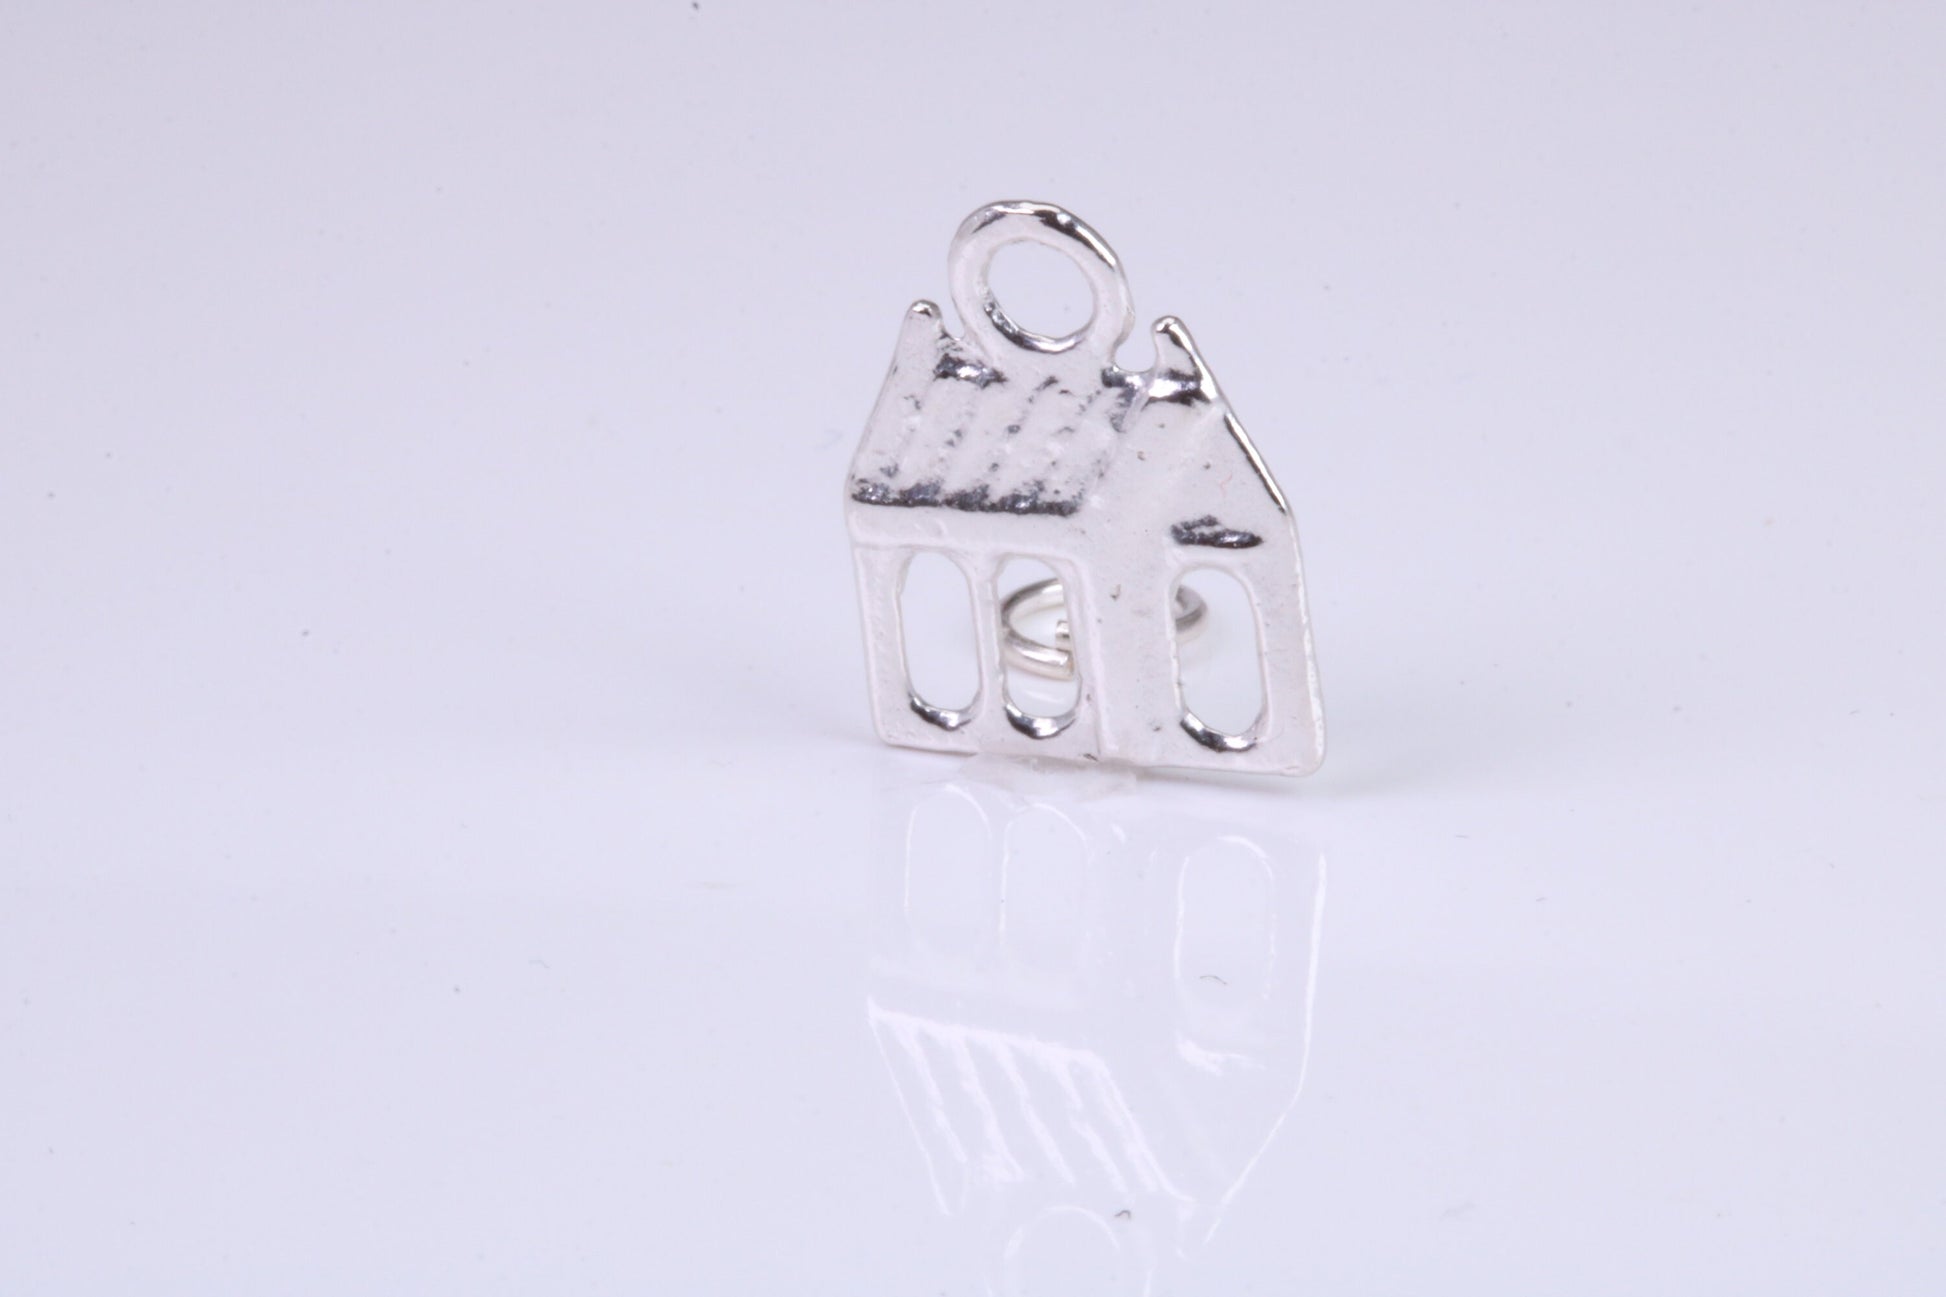 Log Cabin Charm, Traditional Charm, Made from Solid 925 Grade Sterling Silver, Complete with Attachment Link